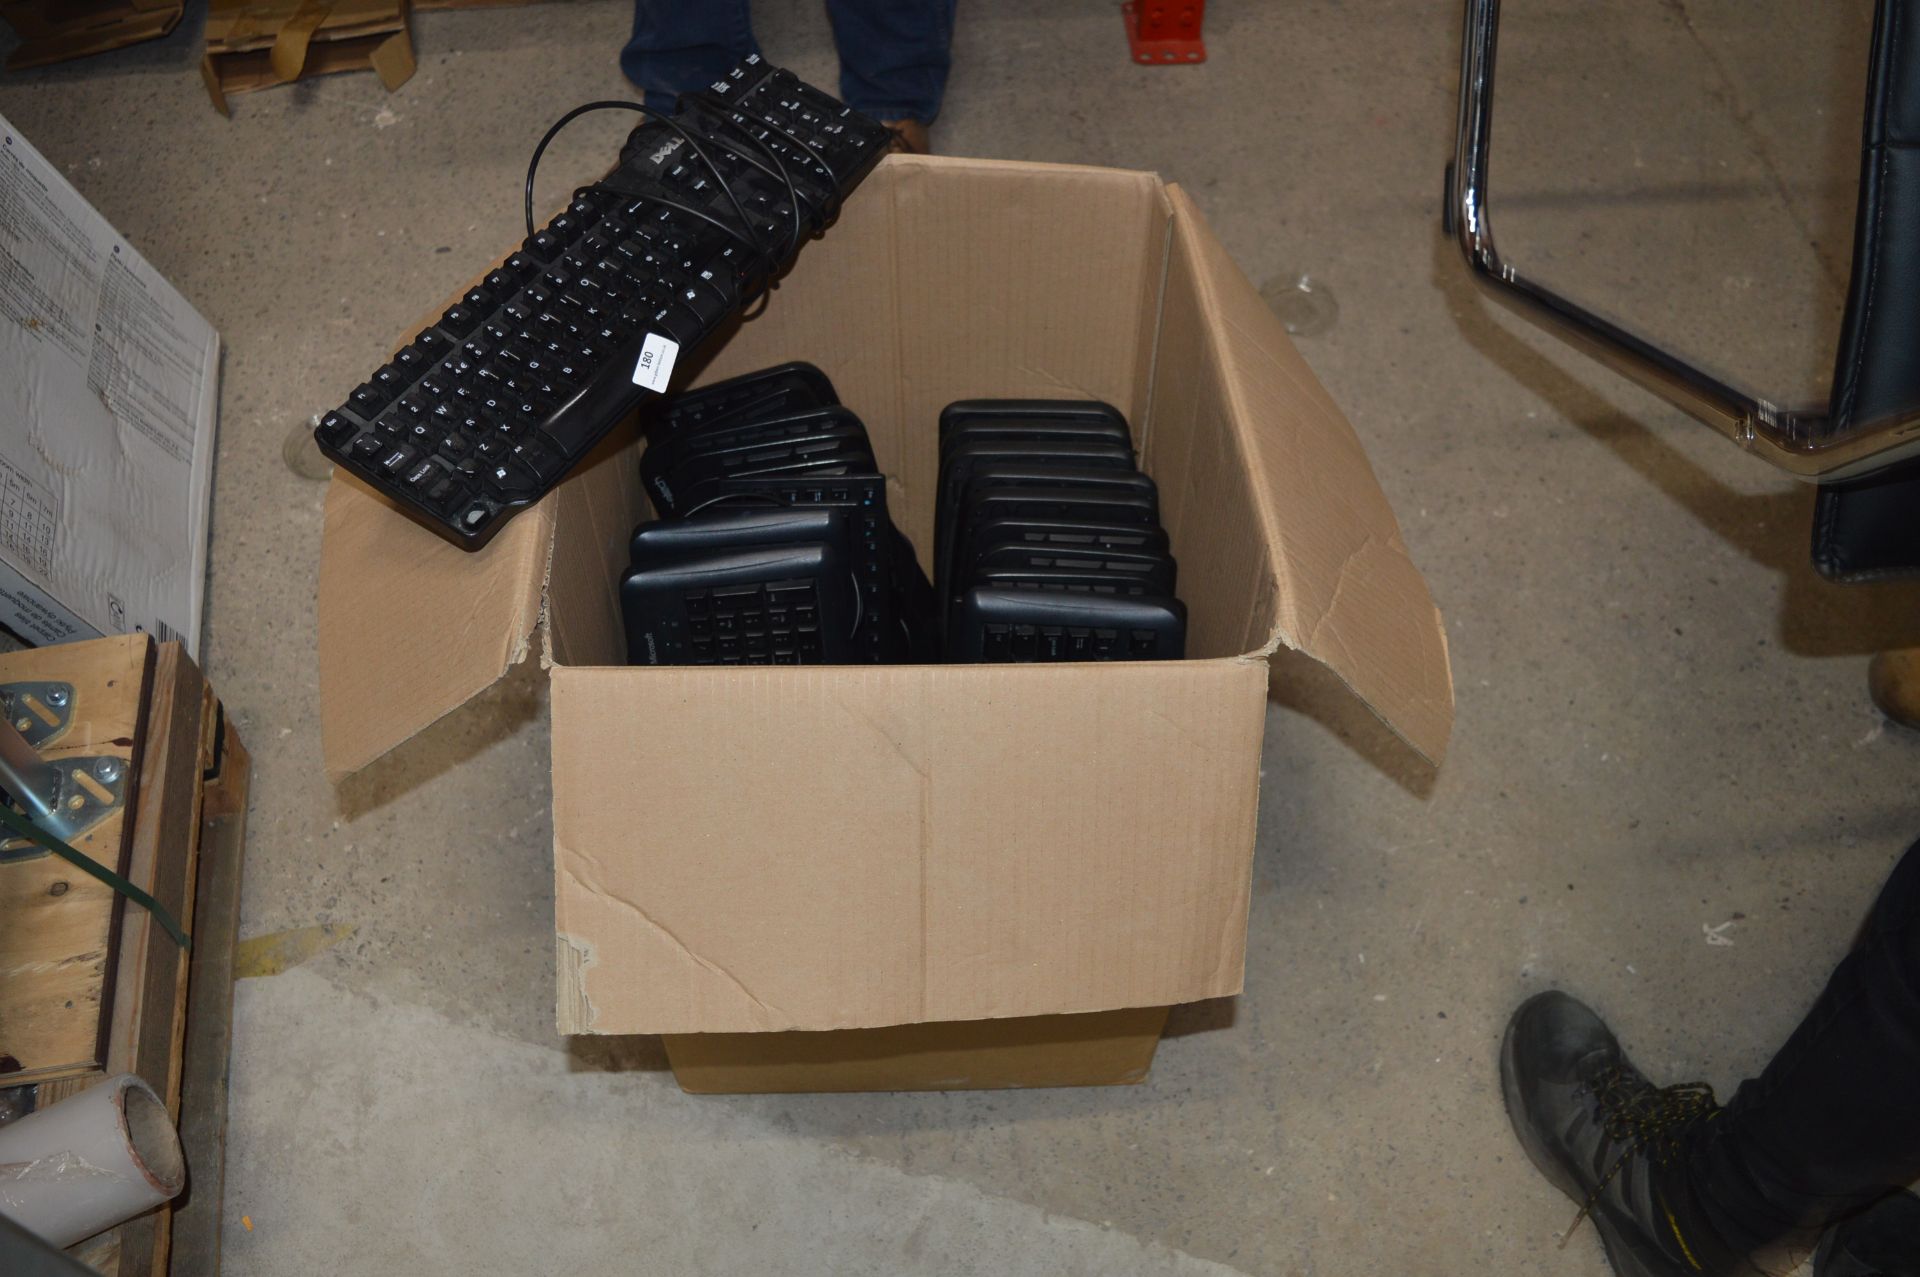 *Twenty Four Dell and Other USB Keyboards